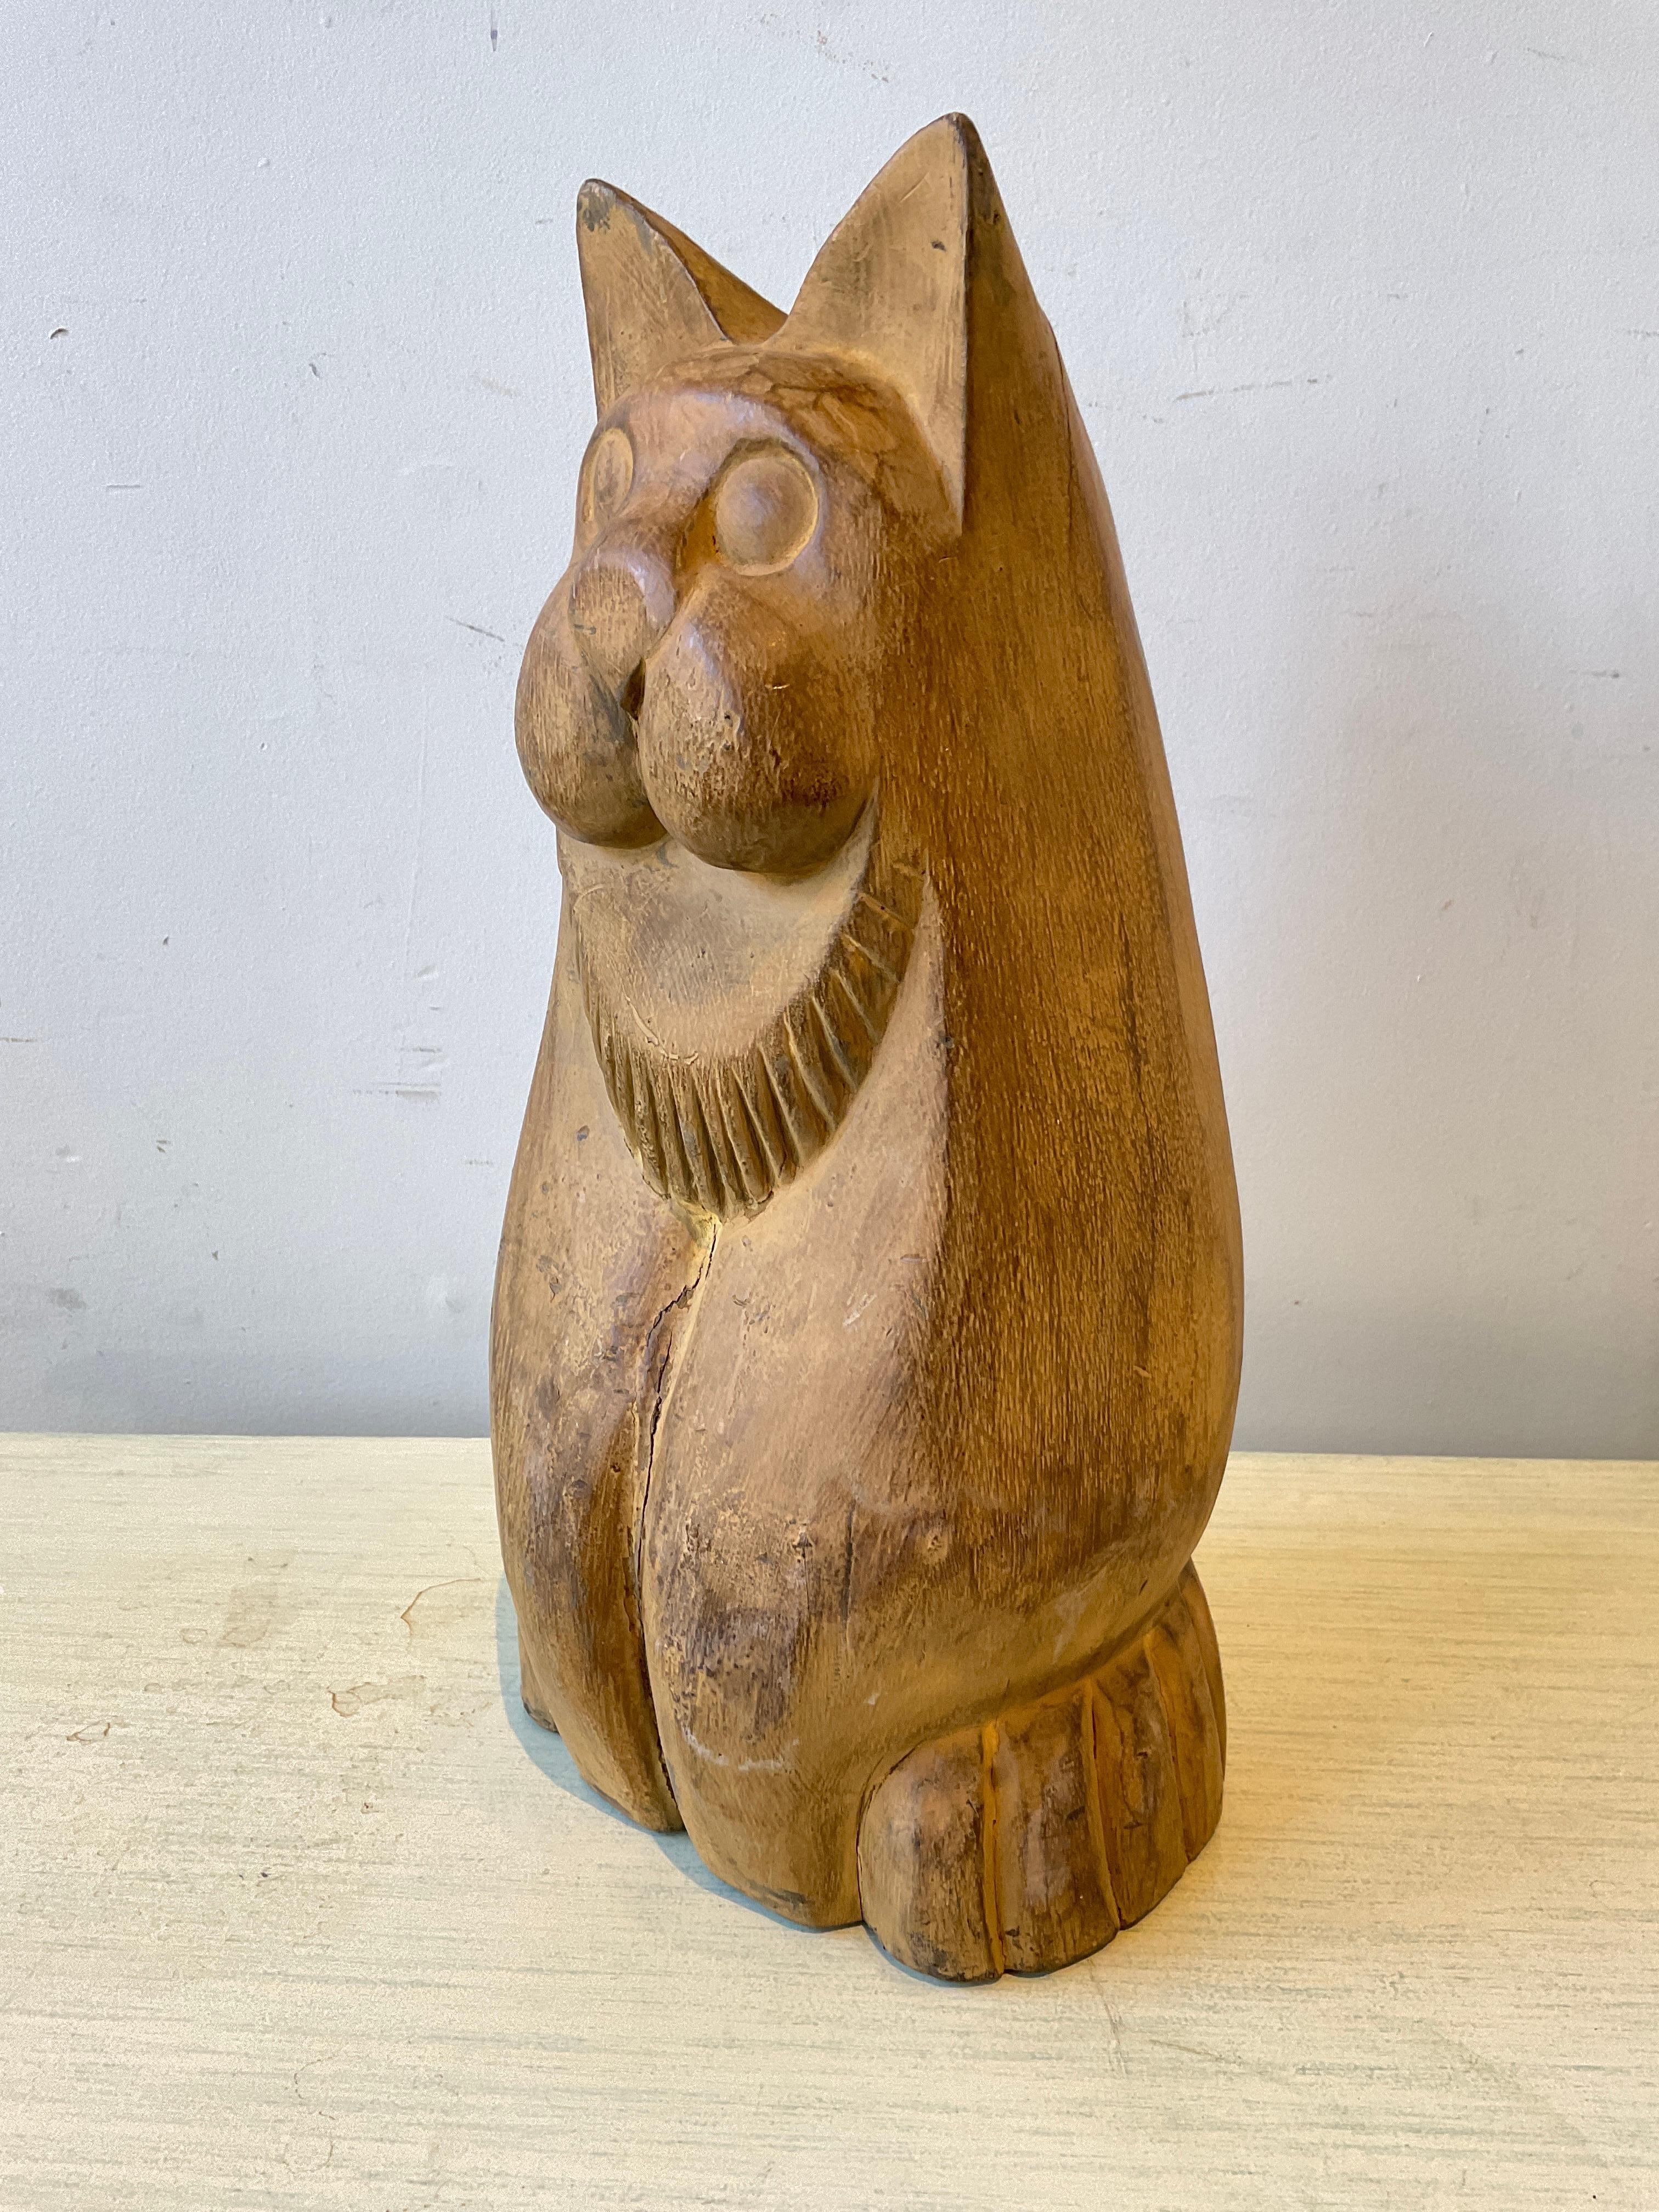 1950sCarved wood cat sculpture. Crack in wood in front.